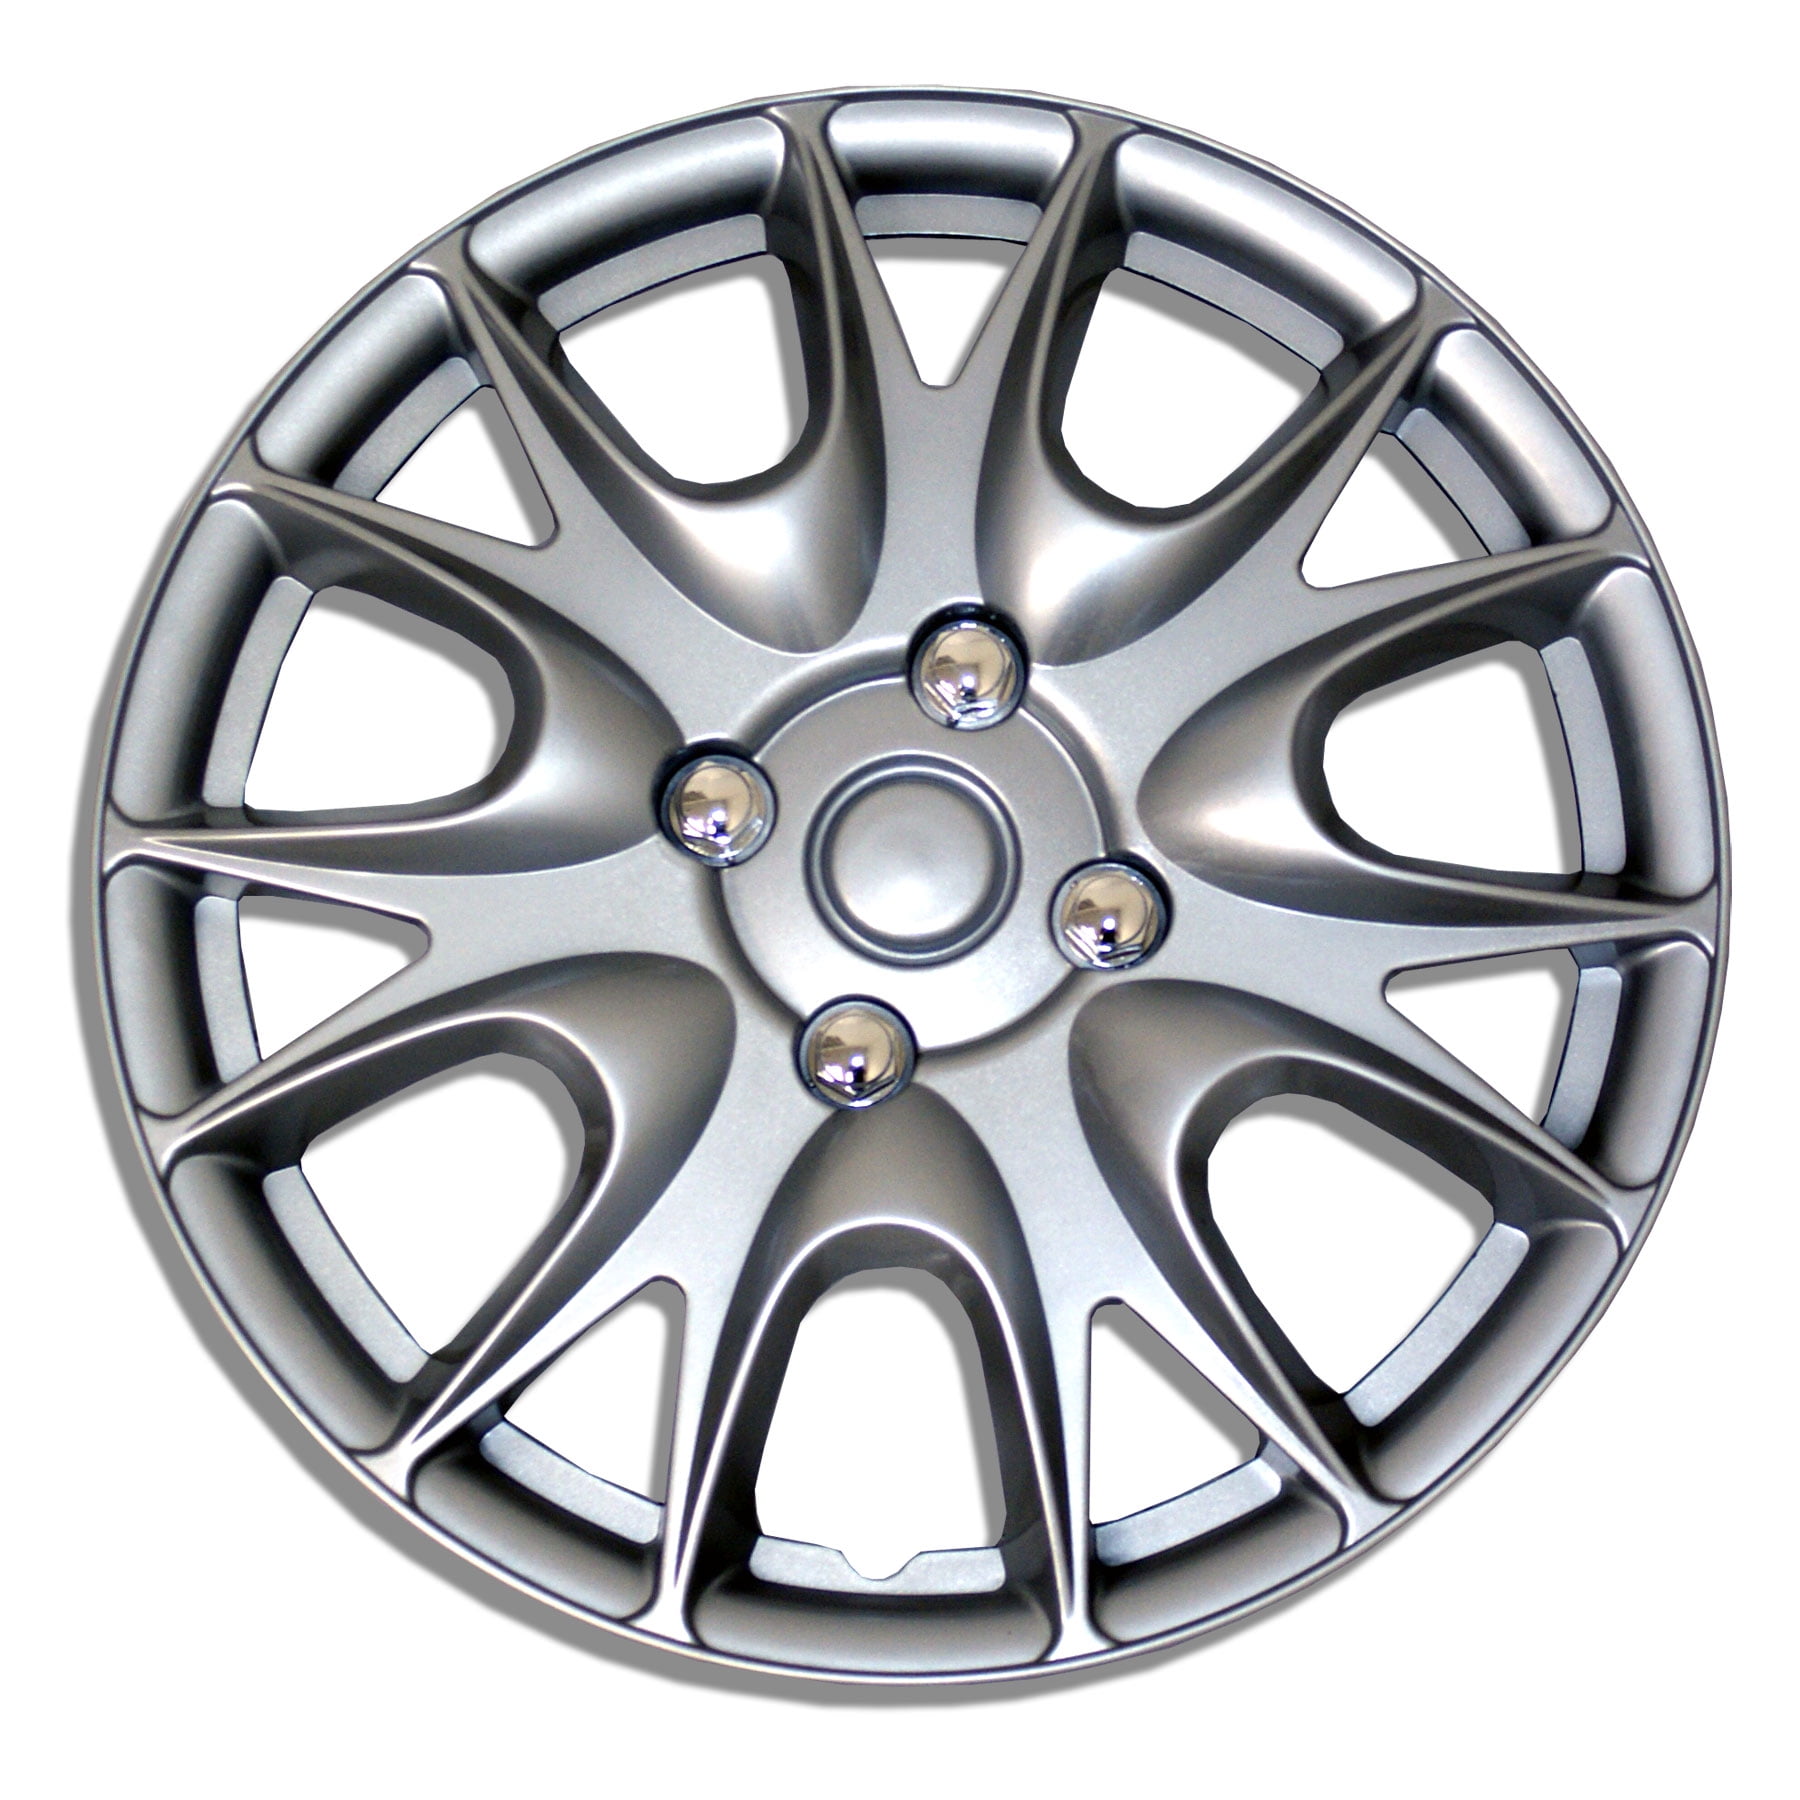 TuningPros WSC-502S15 Hubcaps Wheel Skin Cover 15-Inches Silver Set of 4